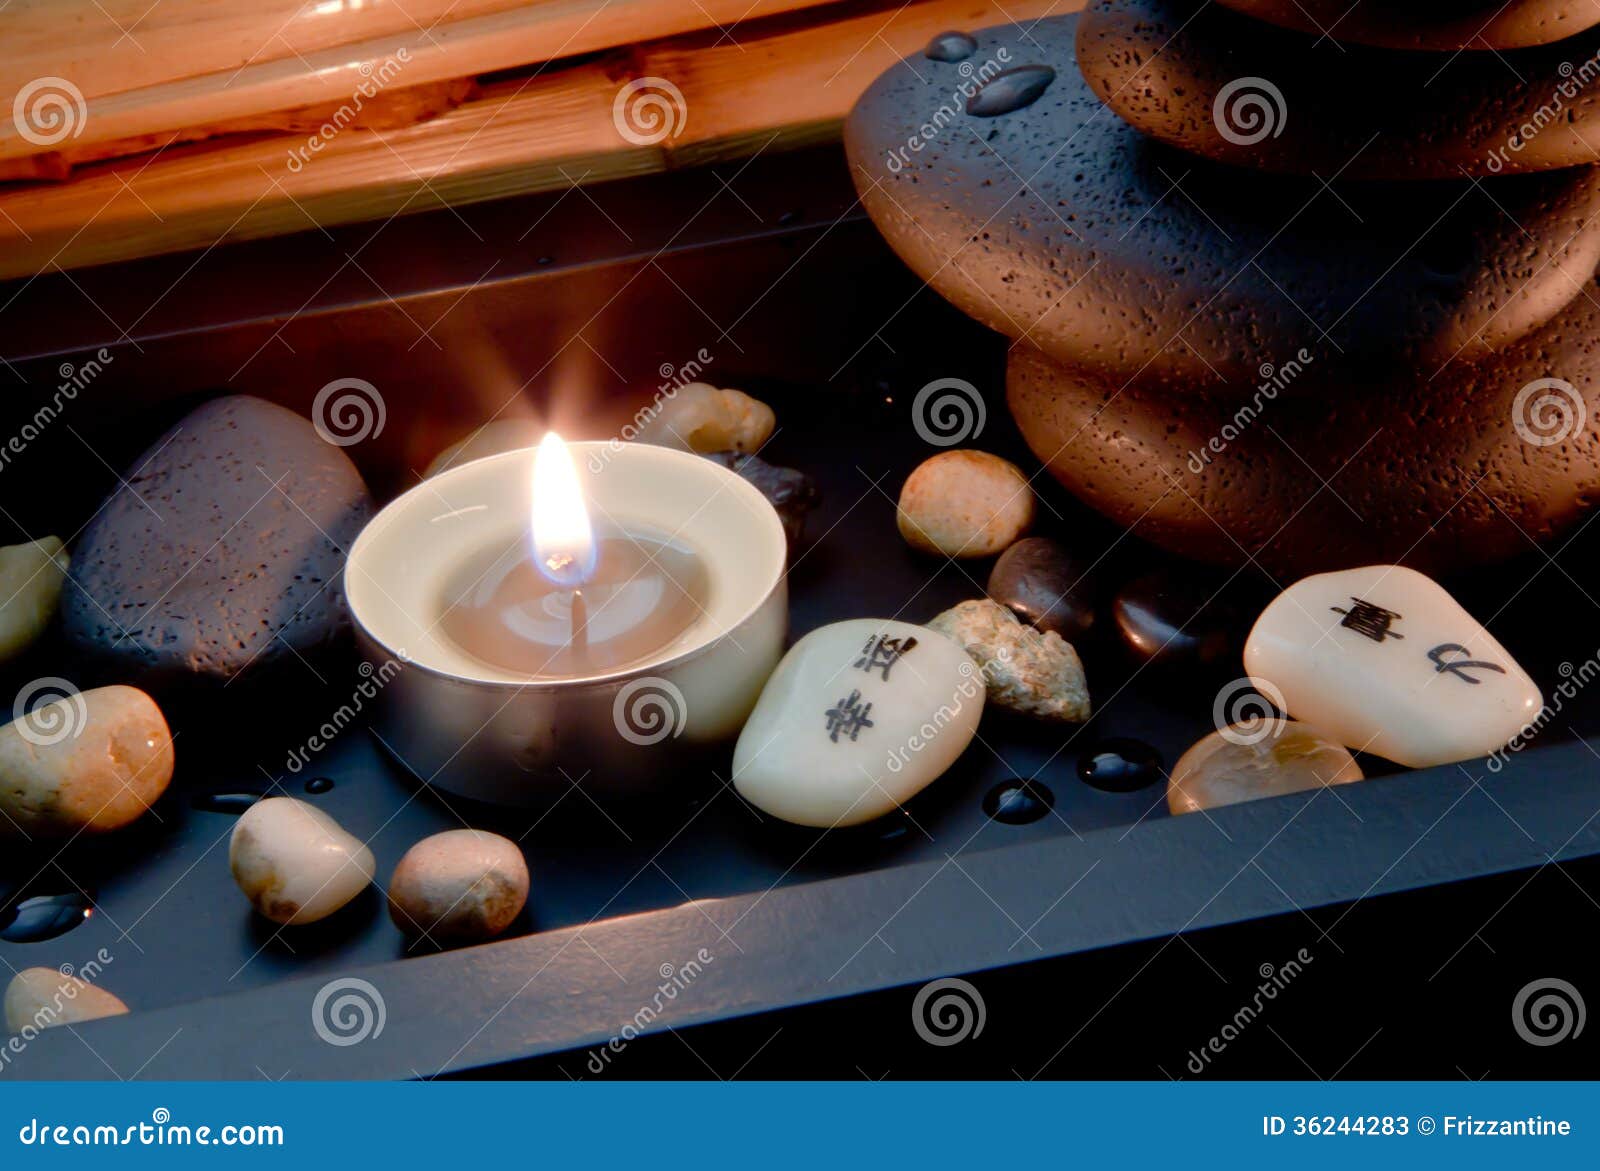 Spa Decoration In Asian Style With Stones And Candle Stock Photos ...